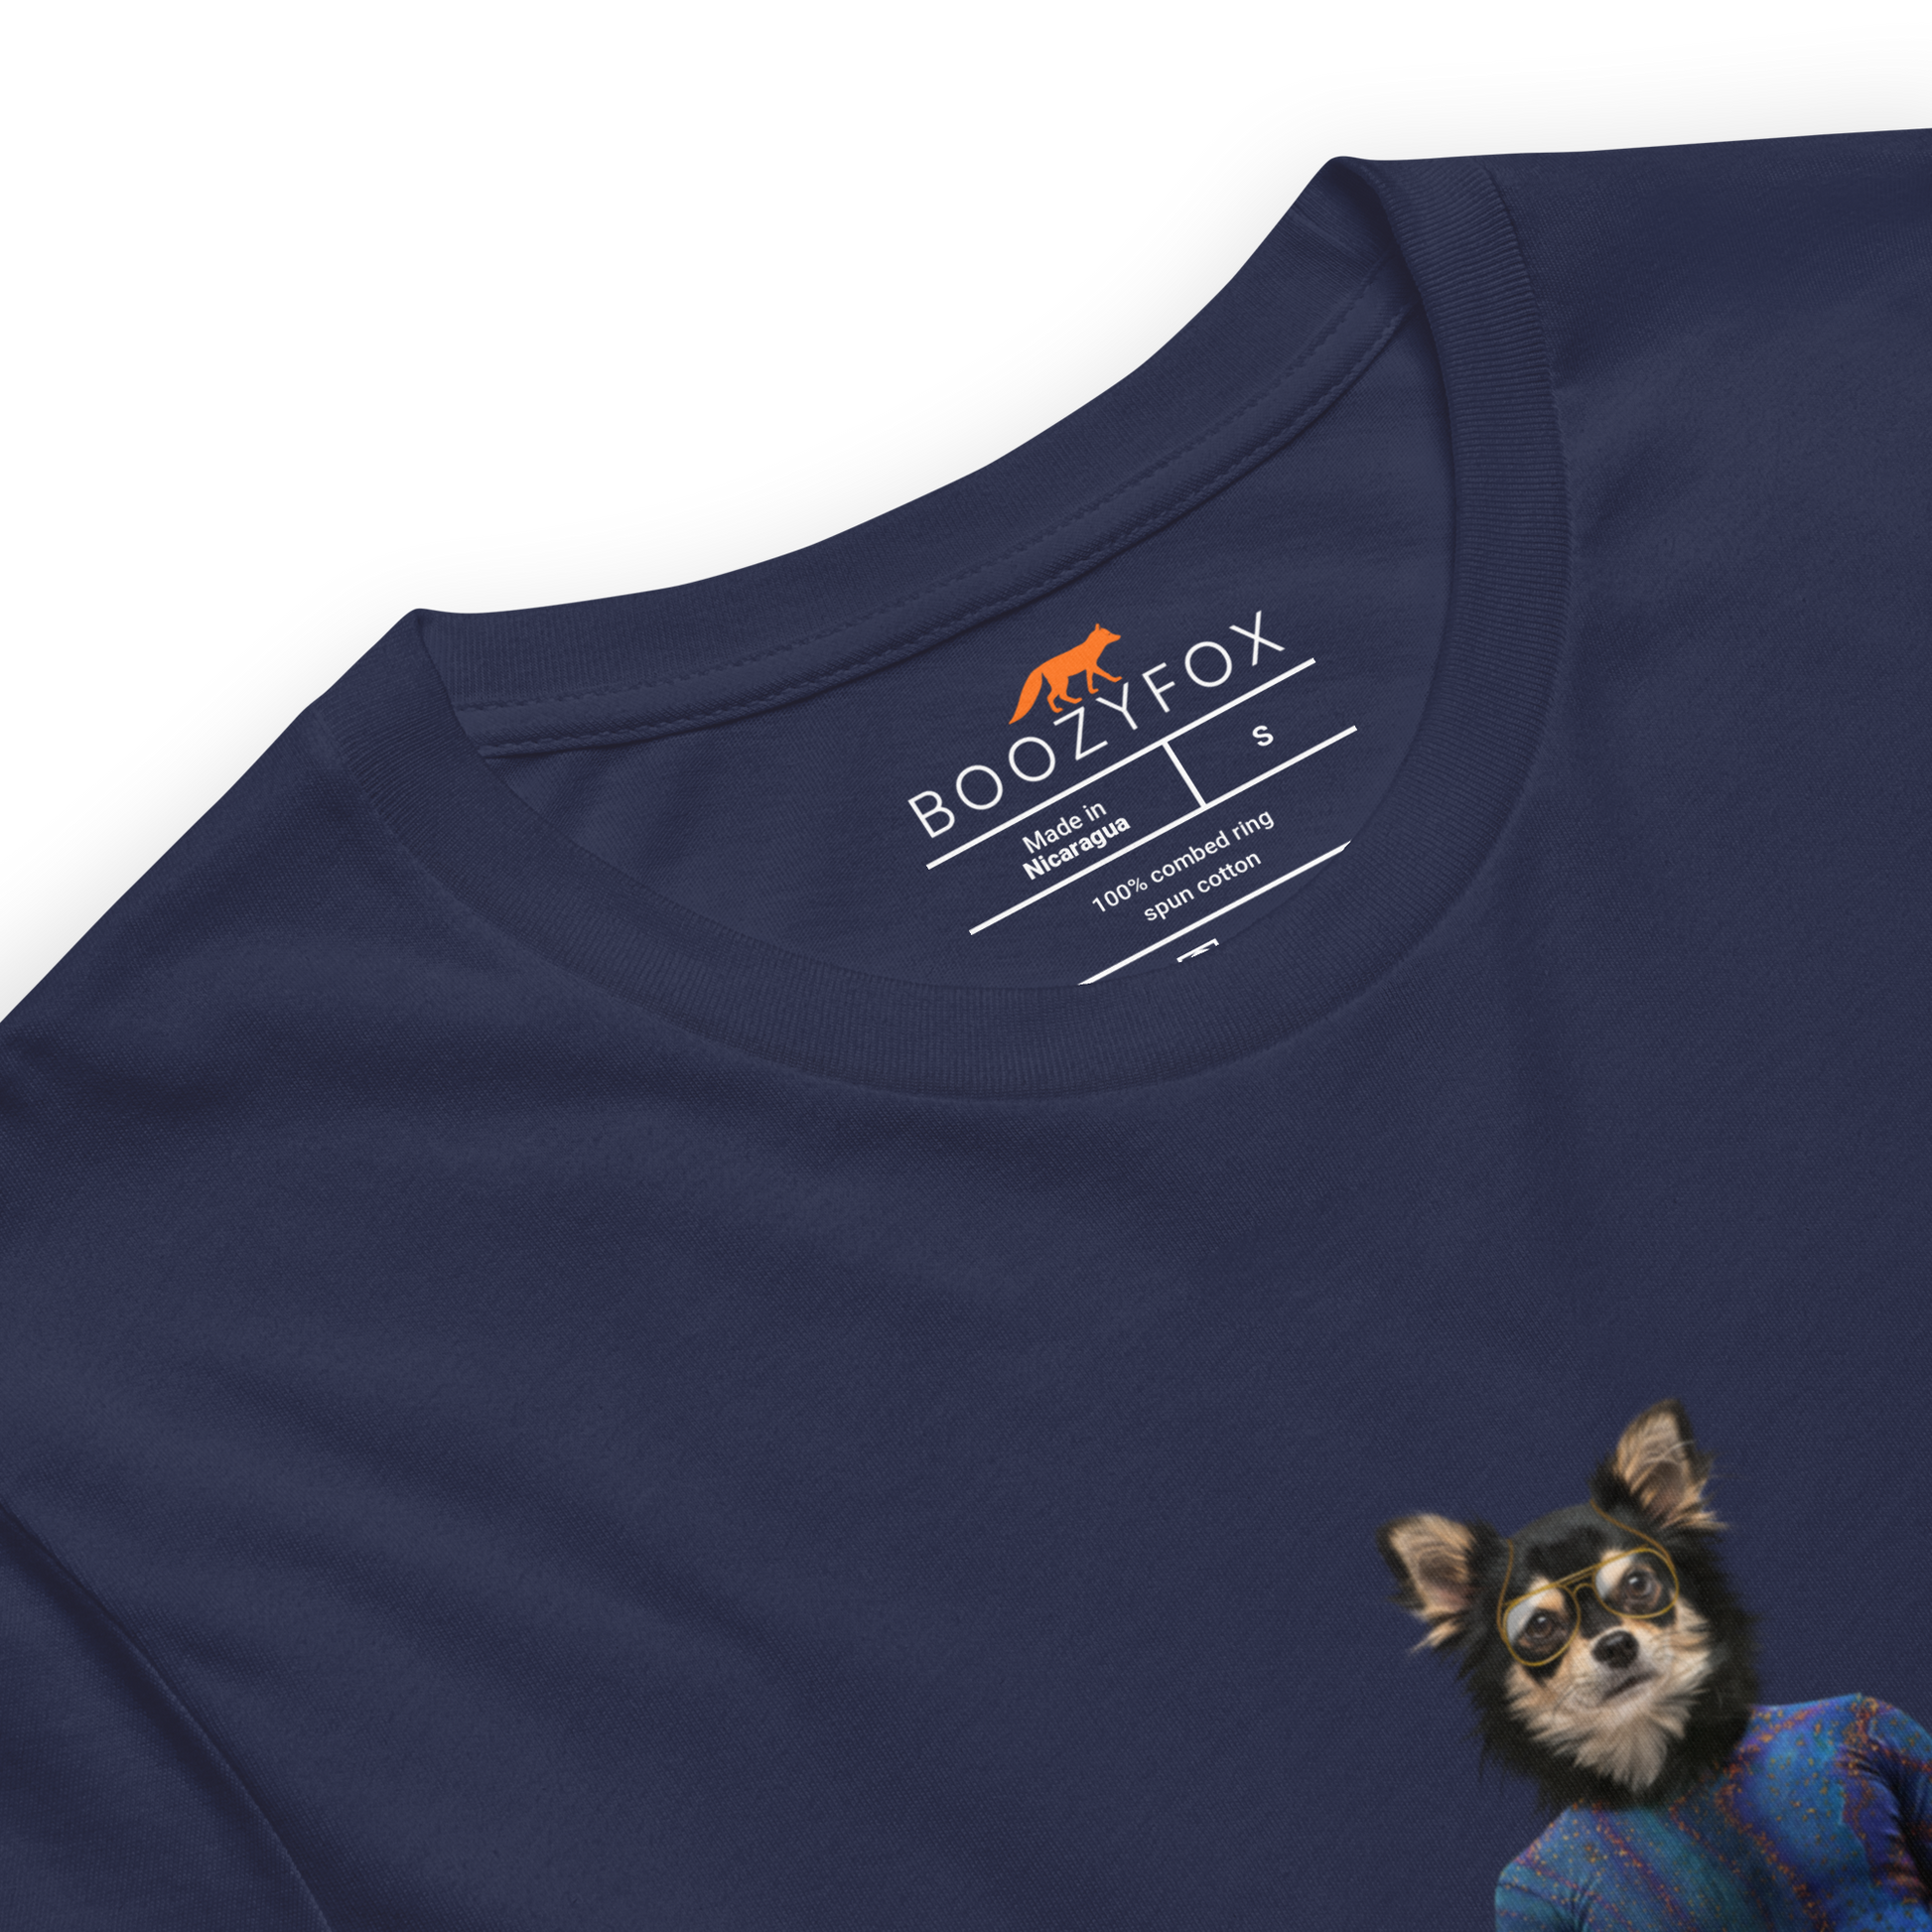 Product details of a Navy Premium Dog T-Shirt featuring an Anthropomorphic Dog graphic on the chest - Funny Graphic Dog Tees - Boozy Fox